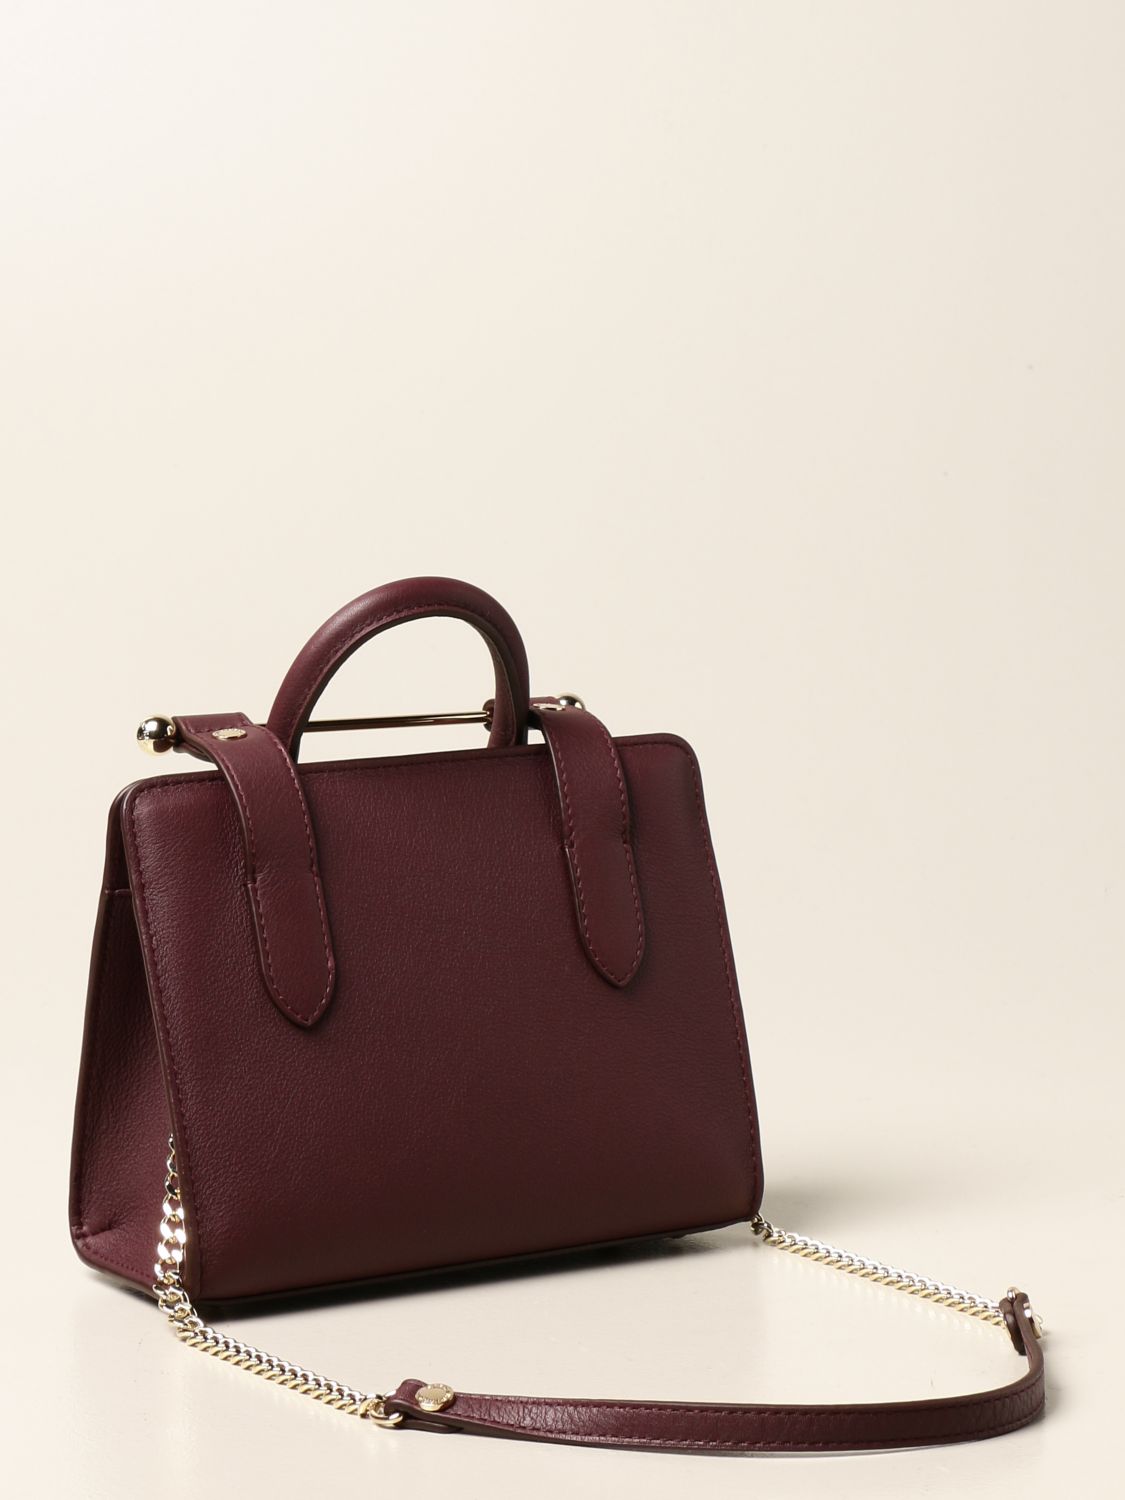 STRATHBERRY: Nano Tote leather bag | Shoulder Bag Strathberry Women ...